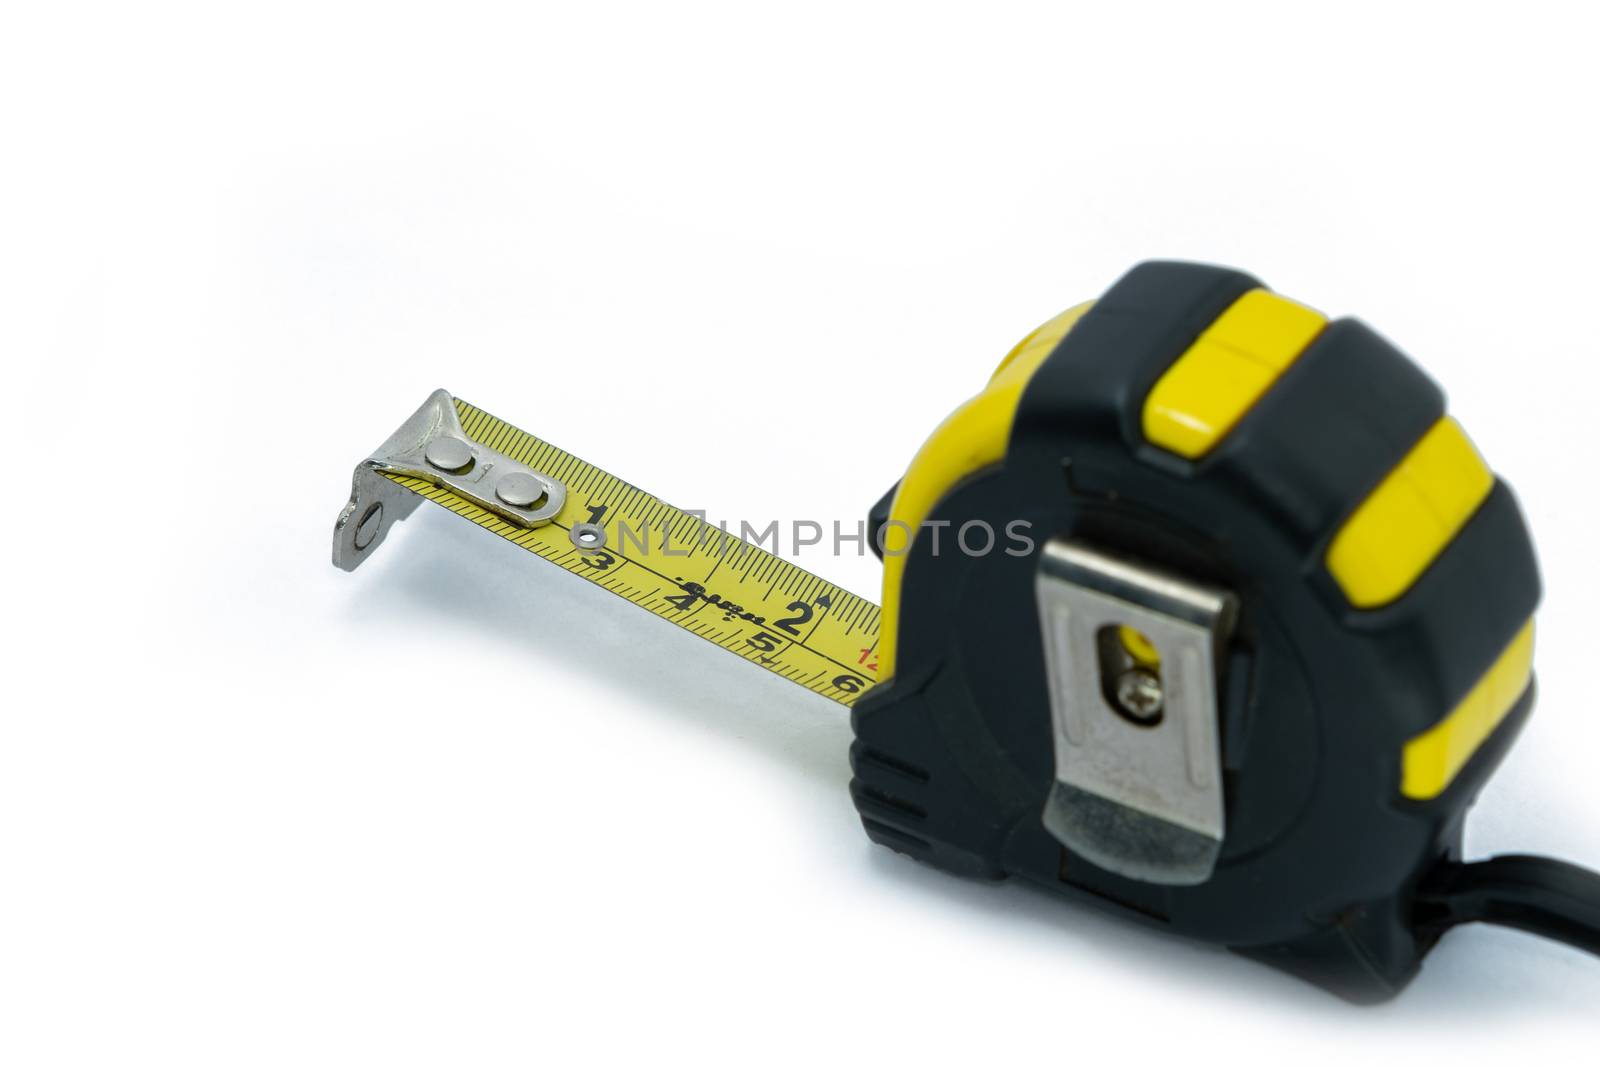 retractable yellow metal measuring tape isolated on a white background. Measurements expressed in centimeters and feet. Construction measuring instrument by peerapixs